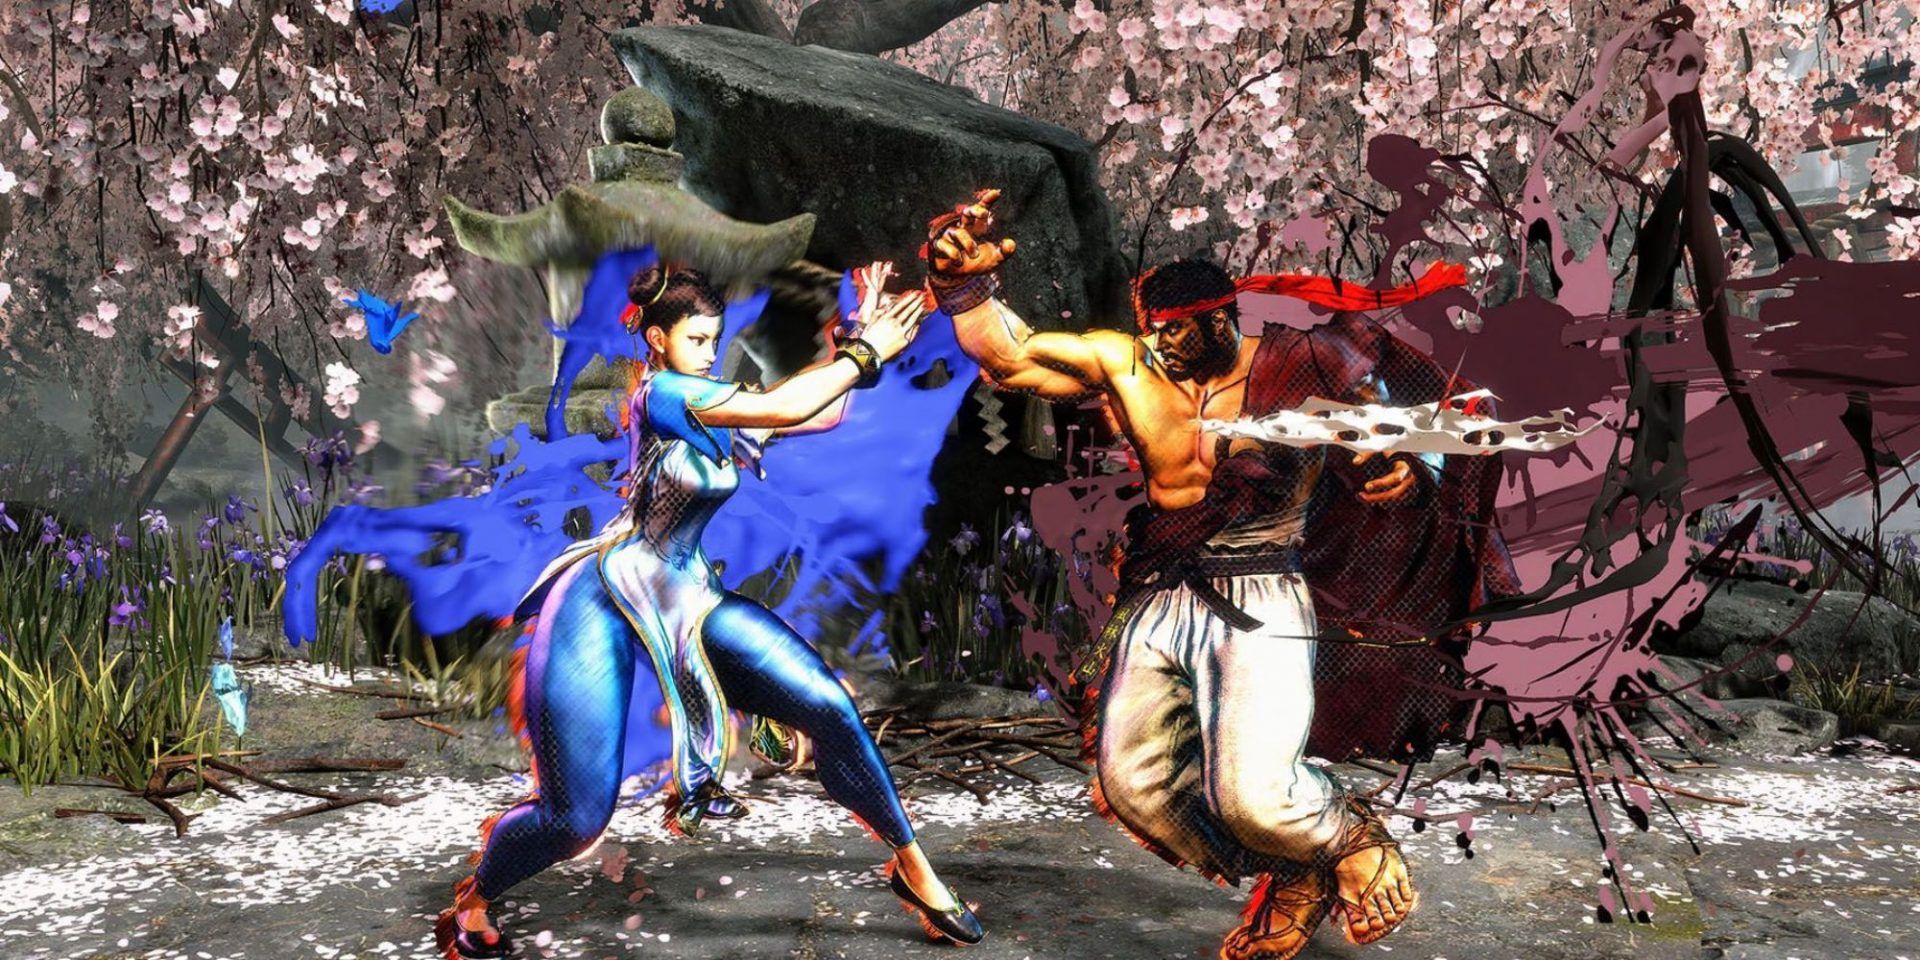 Chun-Li taking on Ryu who is looking to attack in a fight